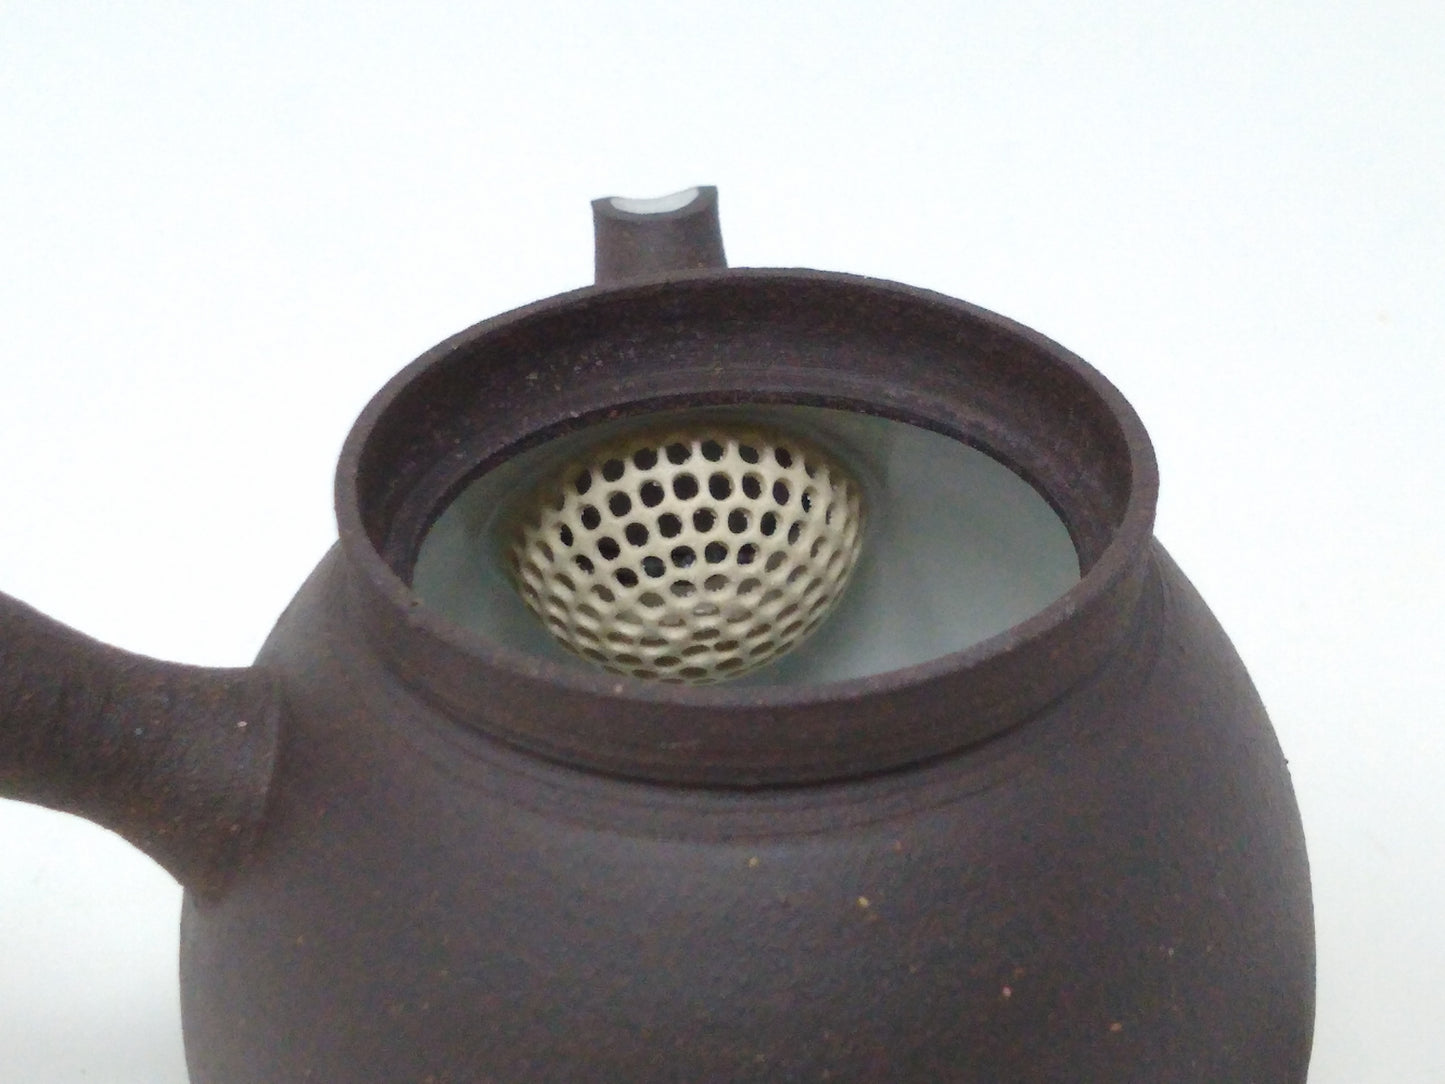 210ml Kyusu with two 50ml cups